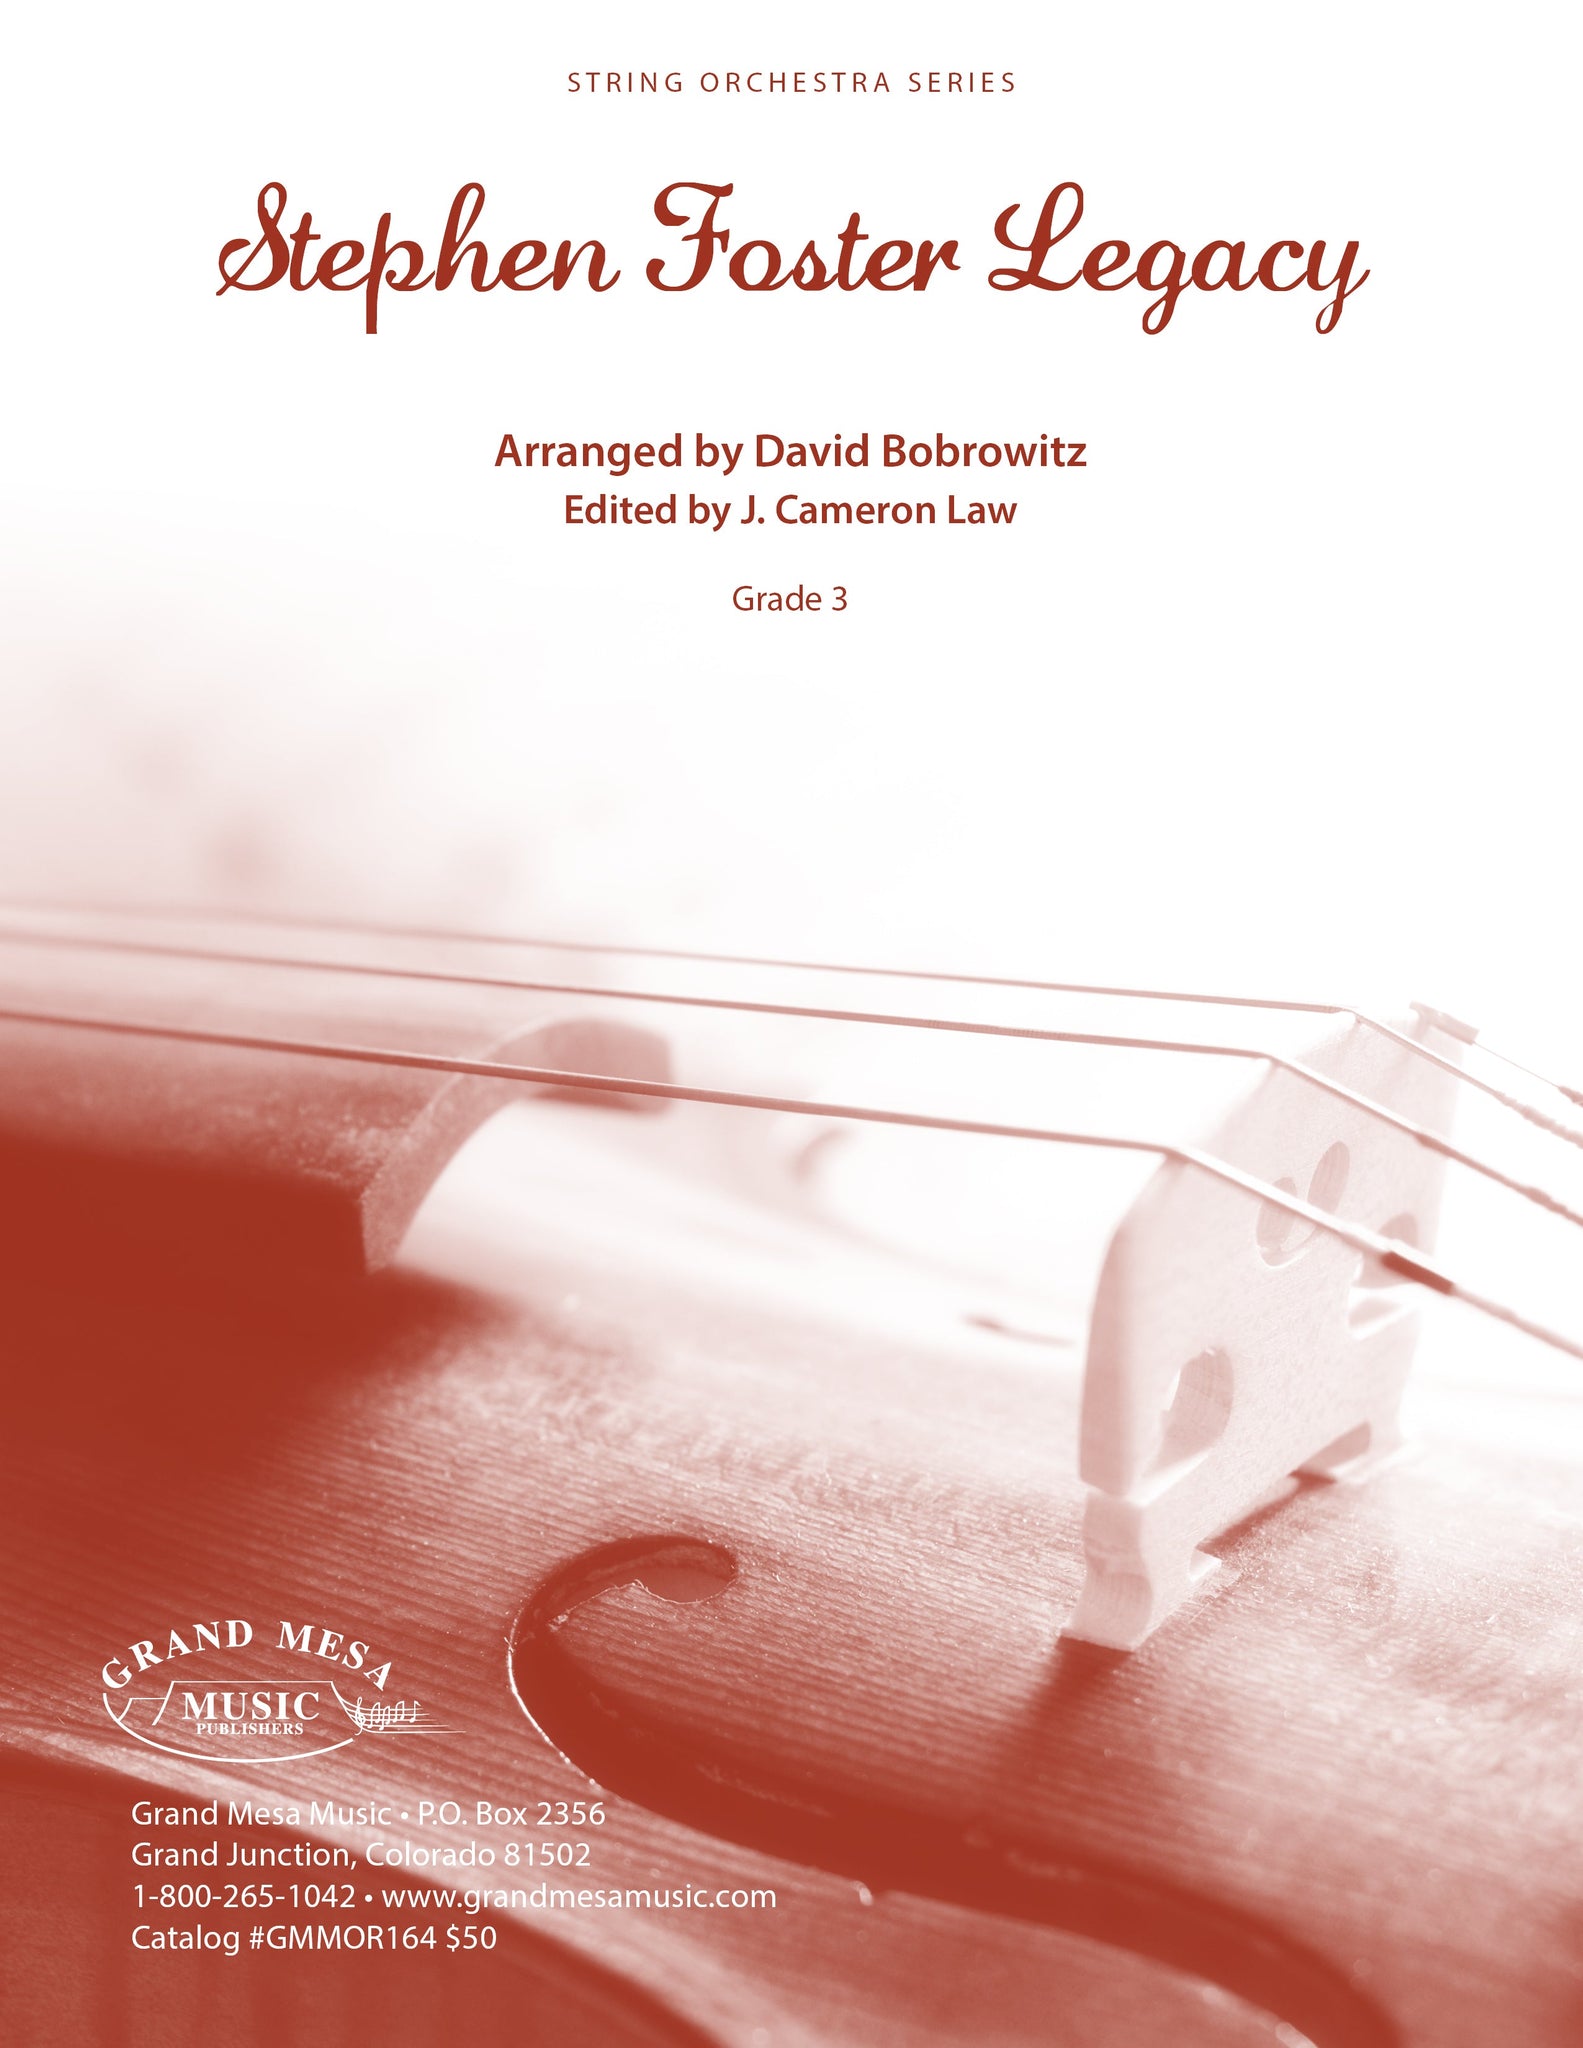 Strings sheet music cover of Stephen Foster Legacy, composed by Stephen Foster, arranged by David Bobrowitz.